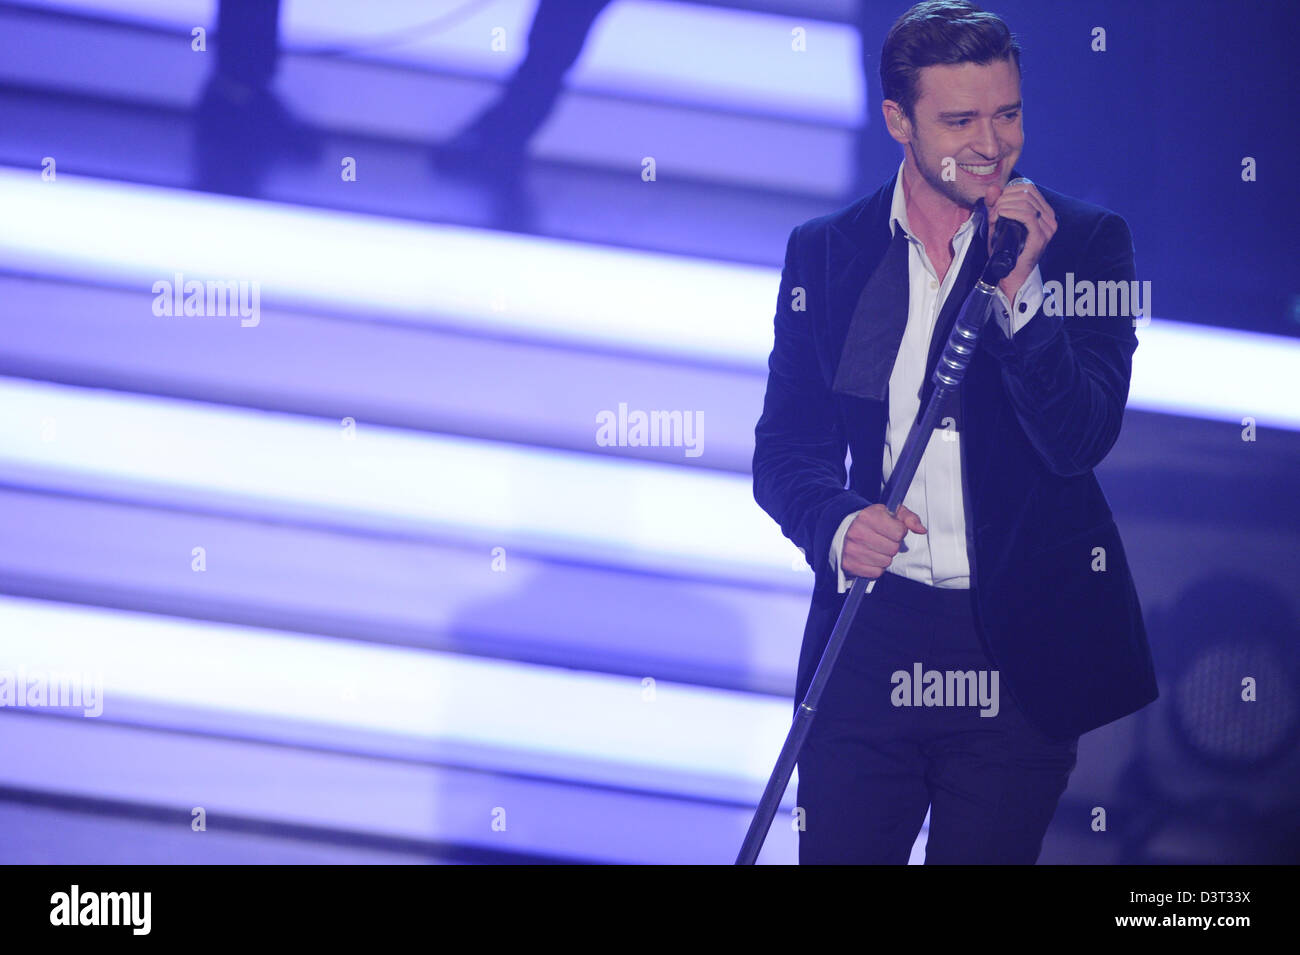 US music star Justin Timberlake performs during the German television show 'Wetten, dass..?', or 'Bet that ...', in Friedrichshafen, Germany, 23 February 2013. Photo: Felix Kaestle Stock Photo